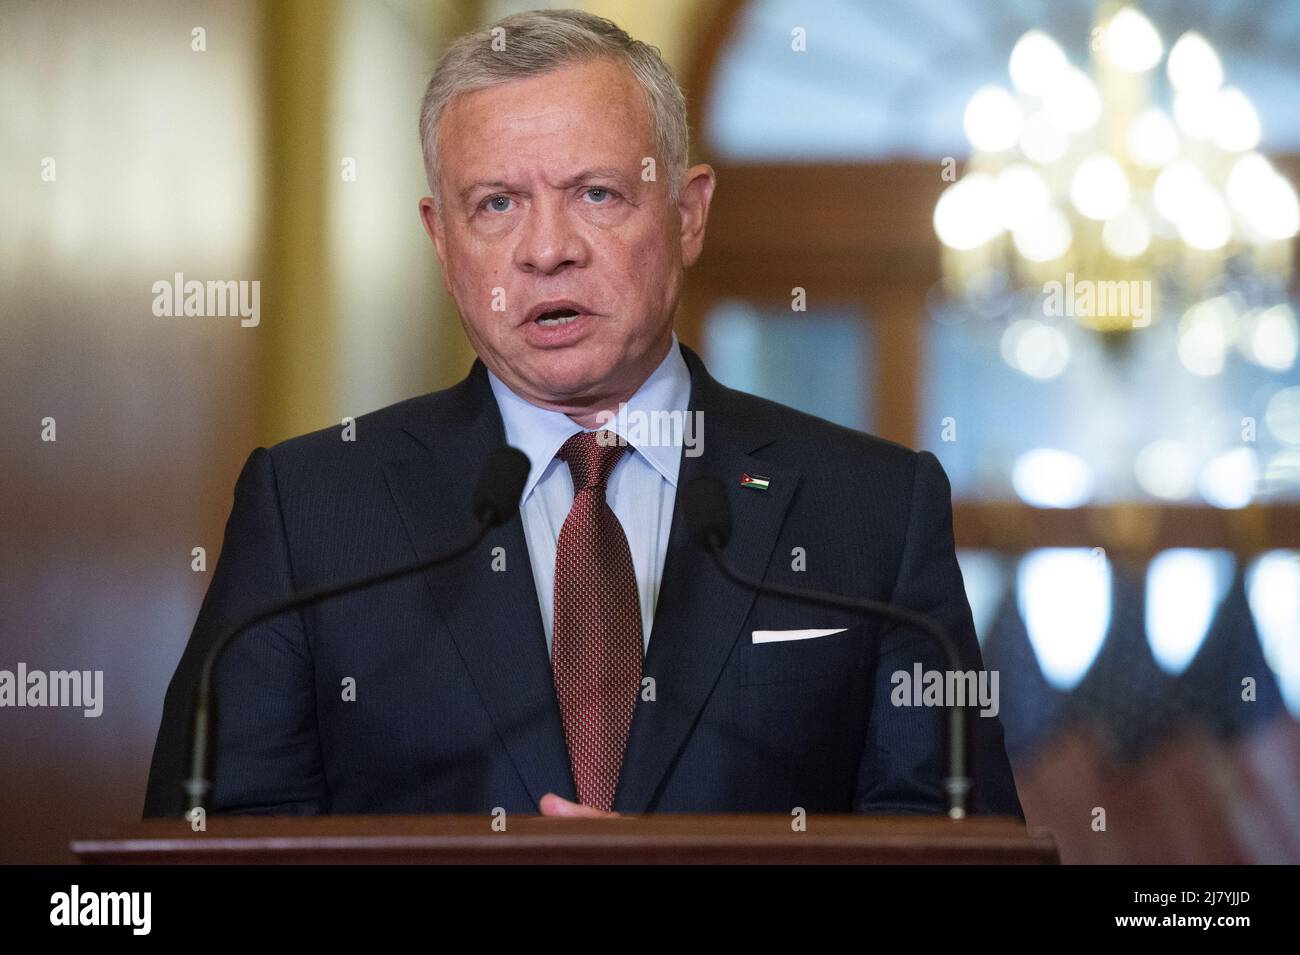 Washington, United States. 11th May, 2022. King Abdullah II bin Al-Hussein of Jordan speaks during a photo-op with Speaker of the House Nancy Pelosi at the U.S. Capitol in Washington, DC on Wednesday, May 11, 2022. Photo by Bonnie Cash/UPI Credit: UPI/Alamy Live News Stock Photo